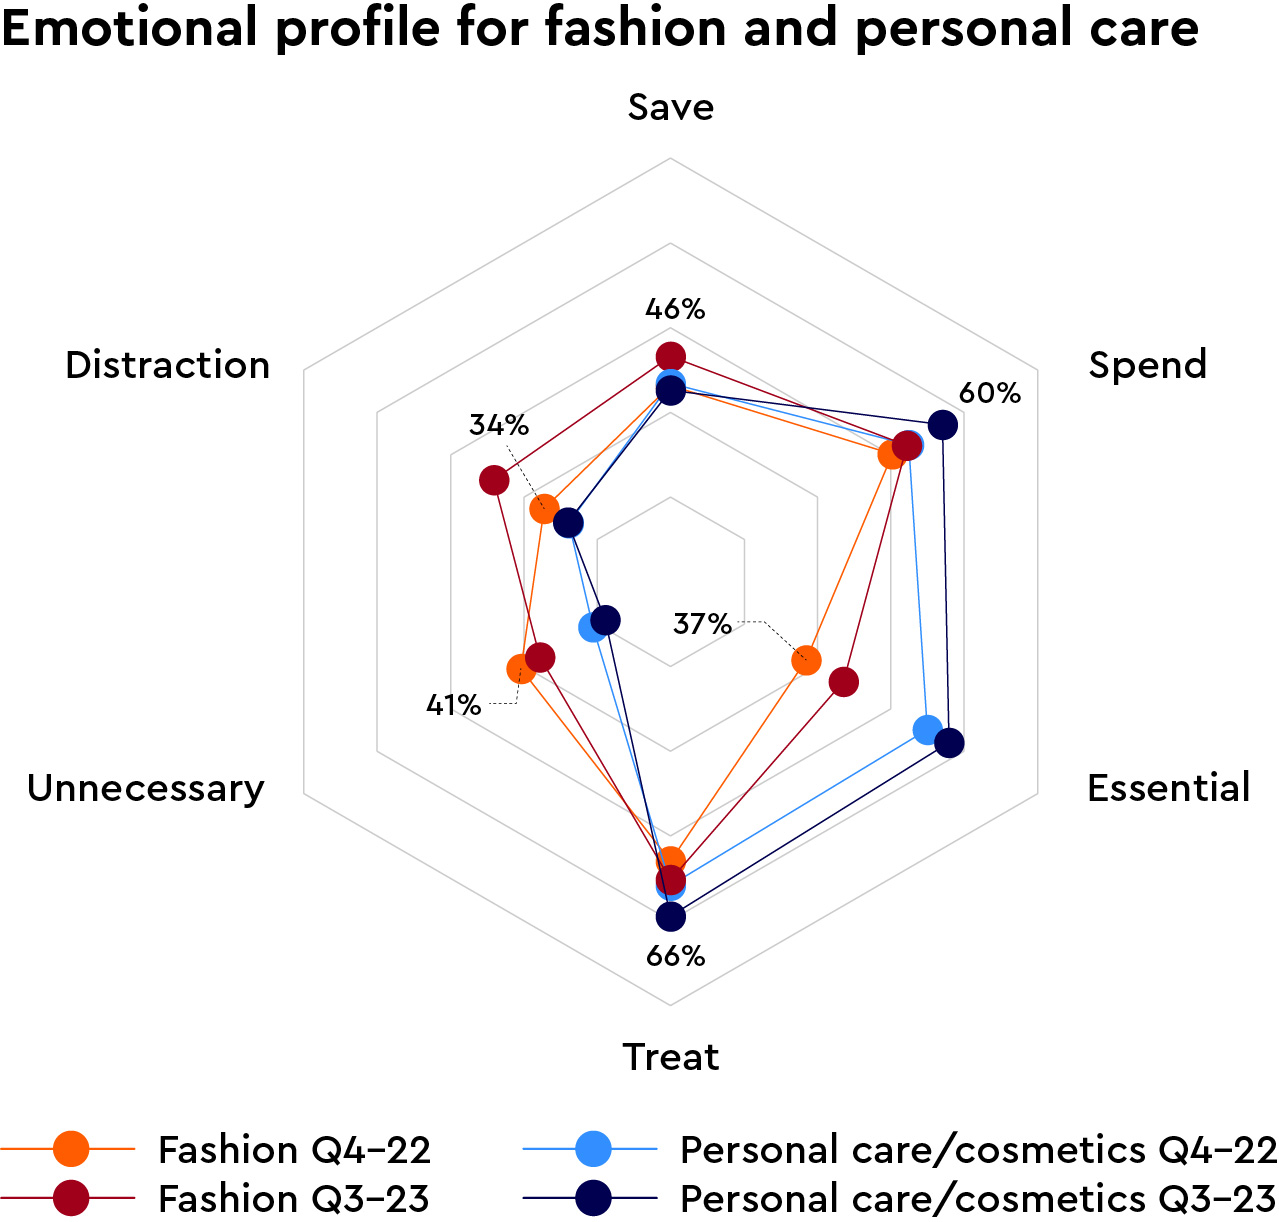 Chart showing emotional profile for fashion and personal care